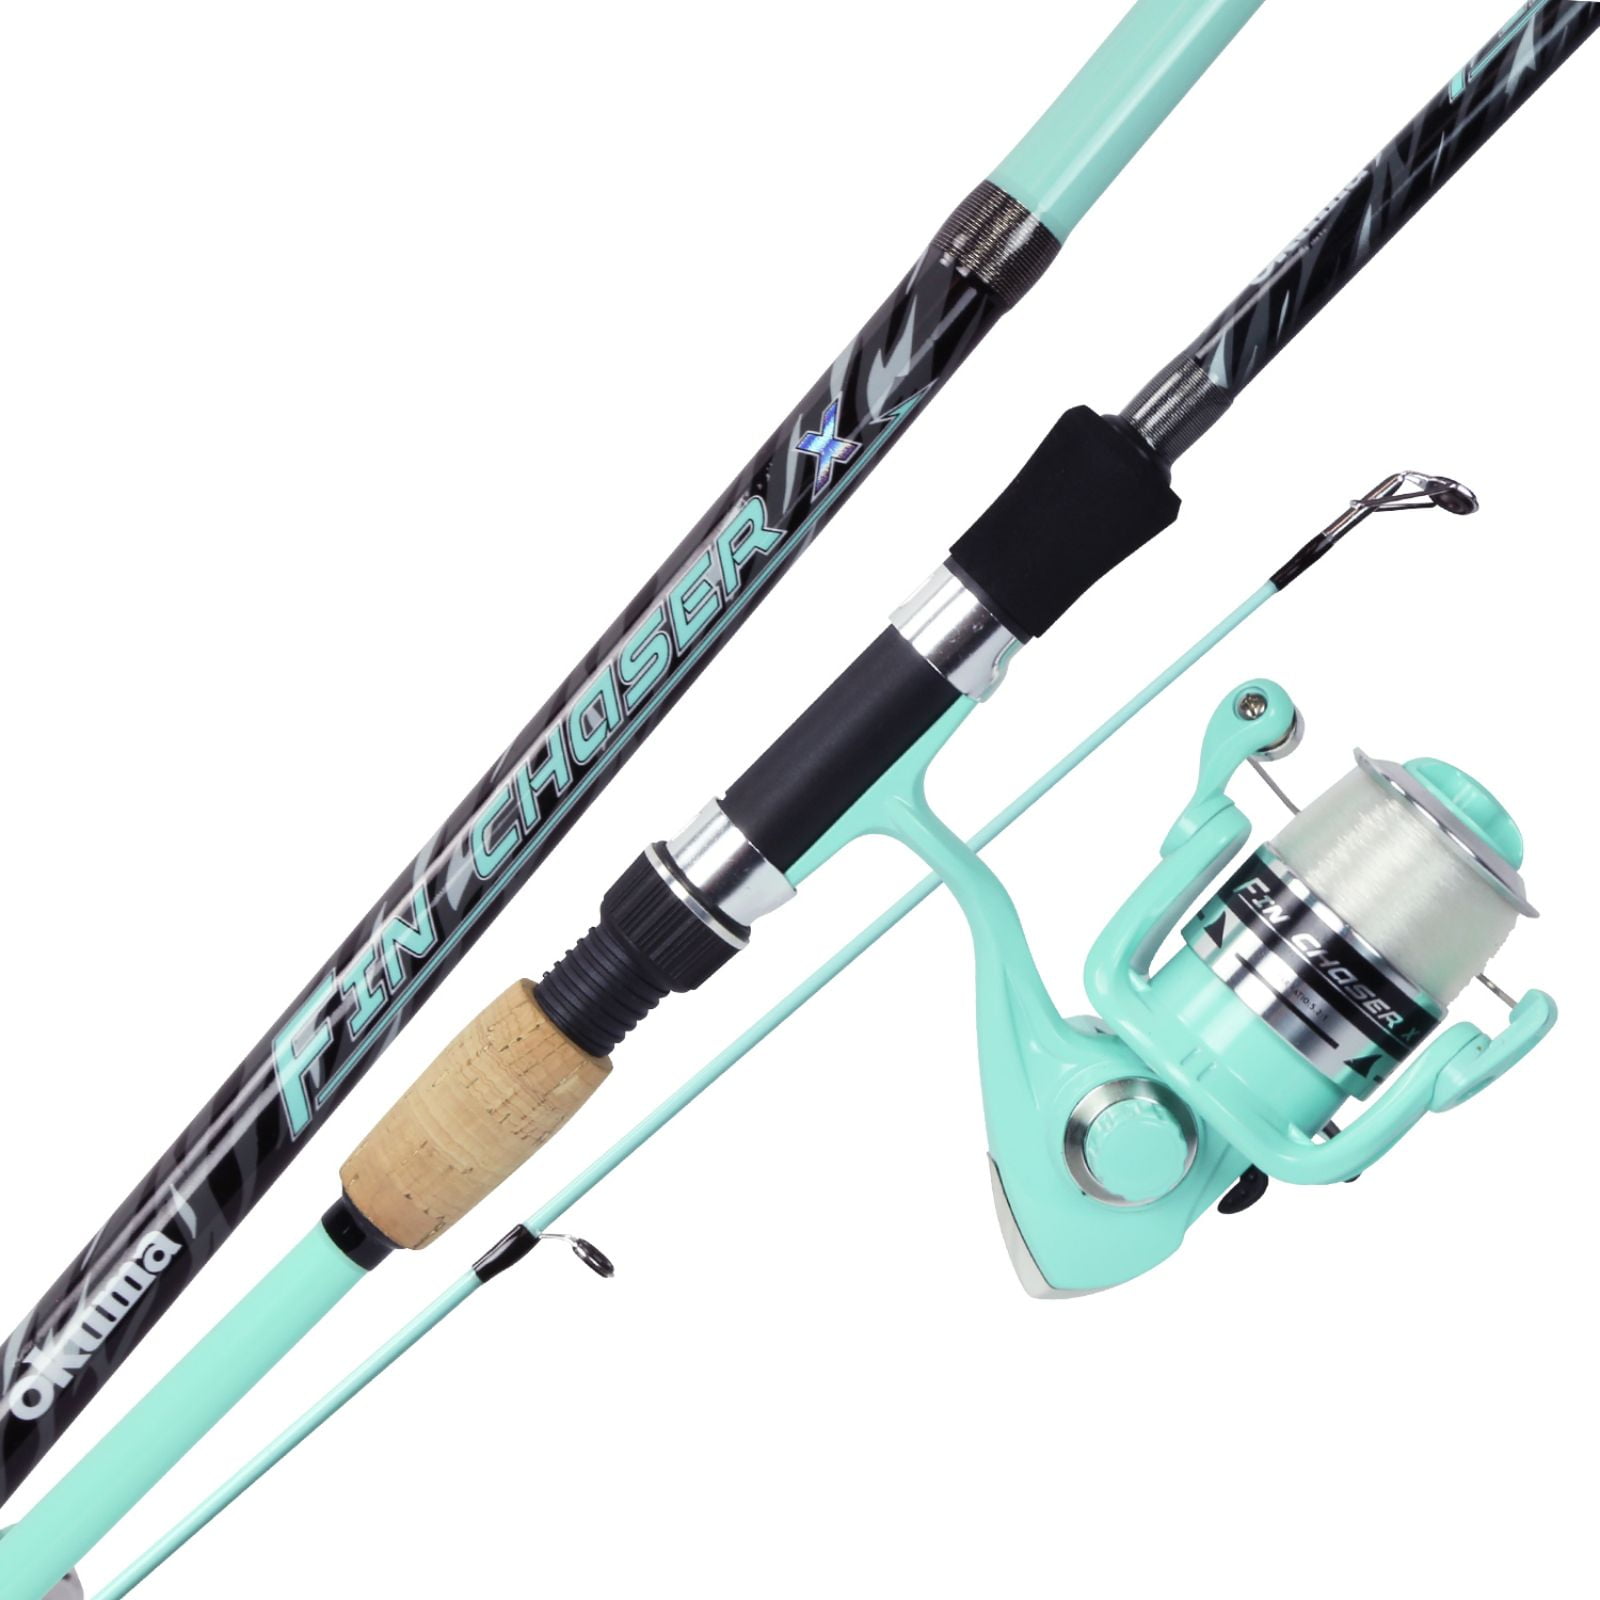 Okuma A-TAC 7ft Spinning Rod and Reel Combo - Black Grey White Silver Blue by Sportsman's Warehouse